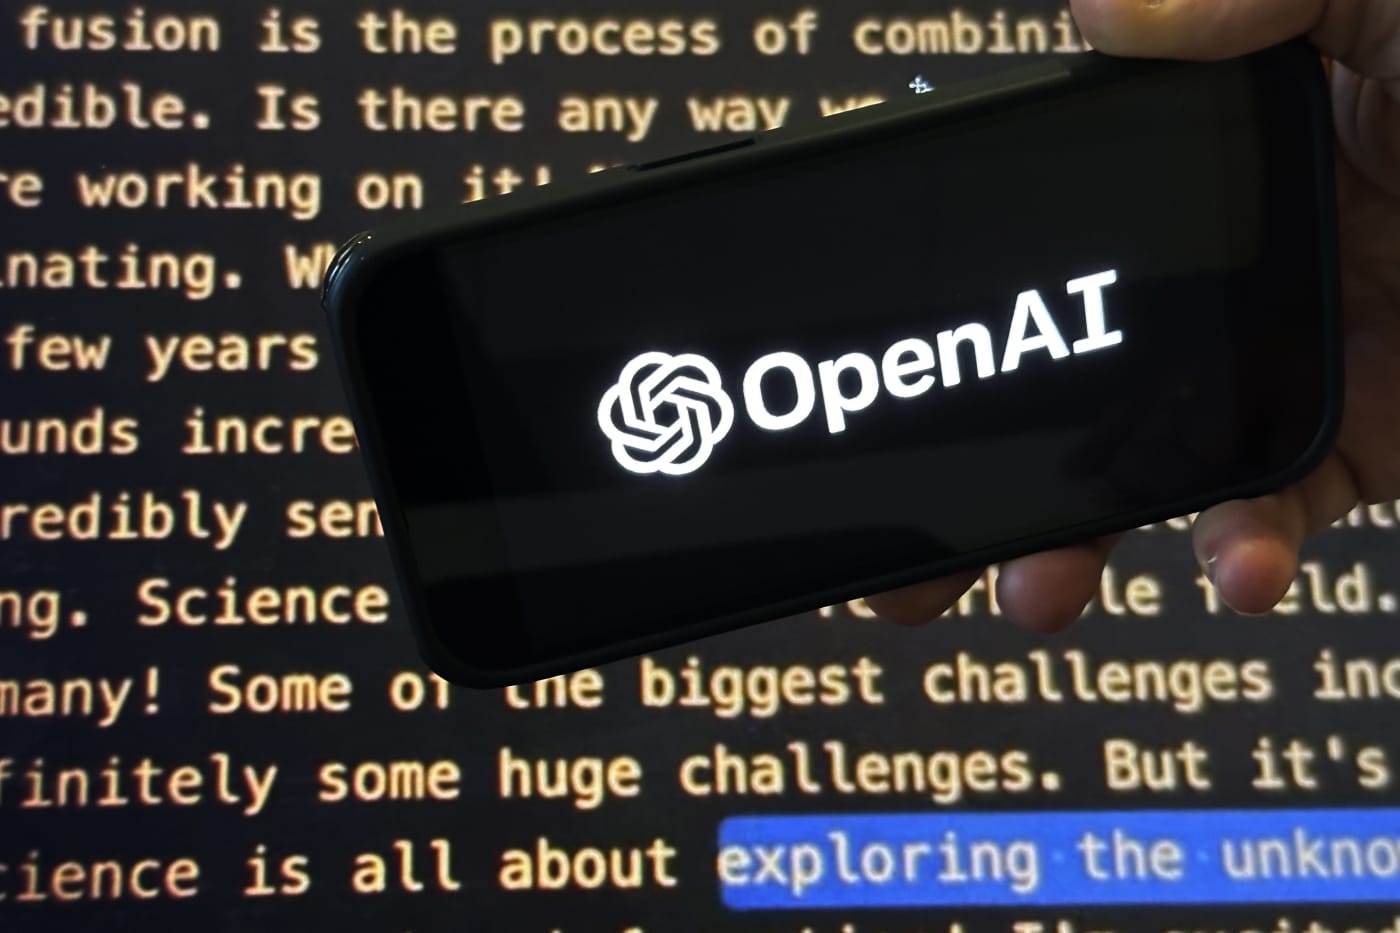 OpenAI claims that its free GPT-4o model can talk, laugh, sing and see like a human